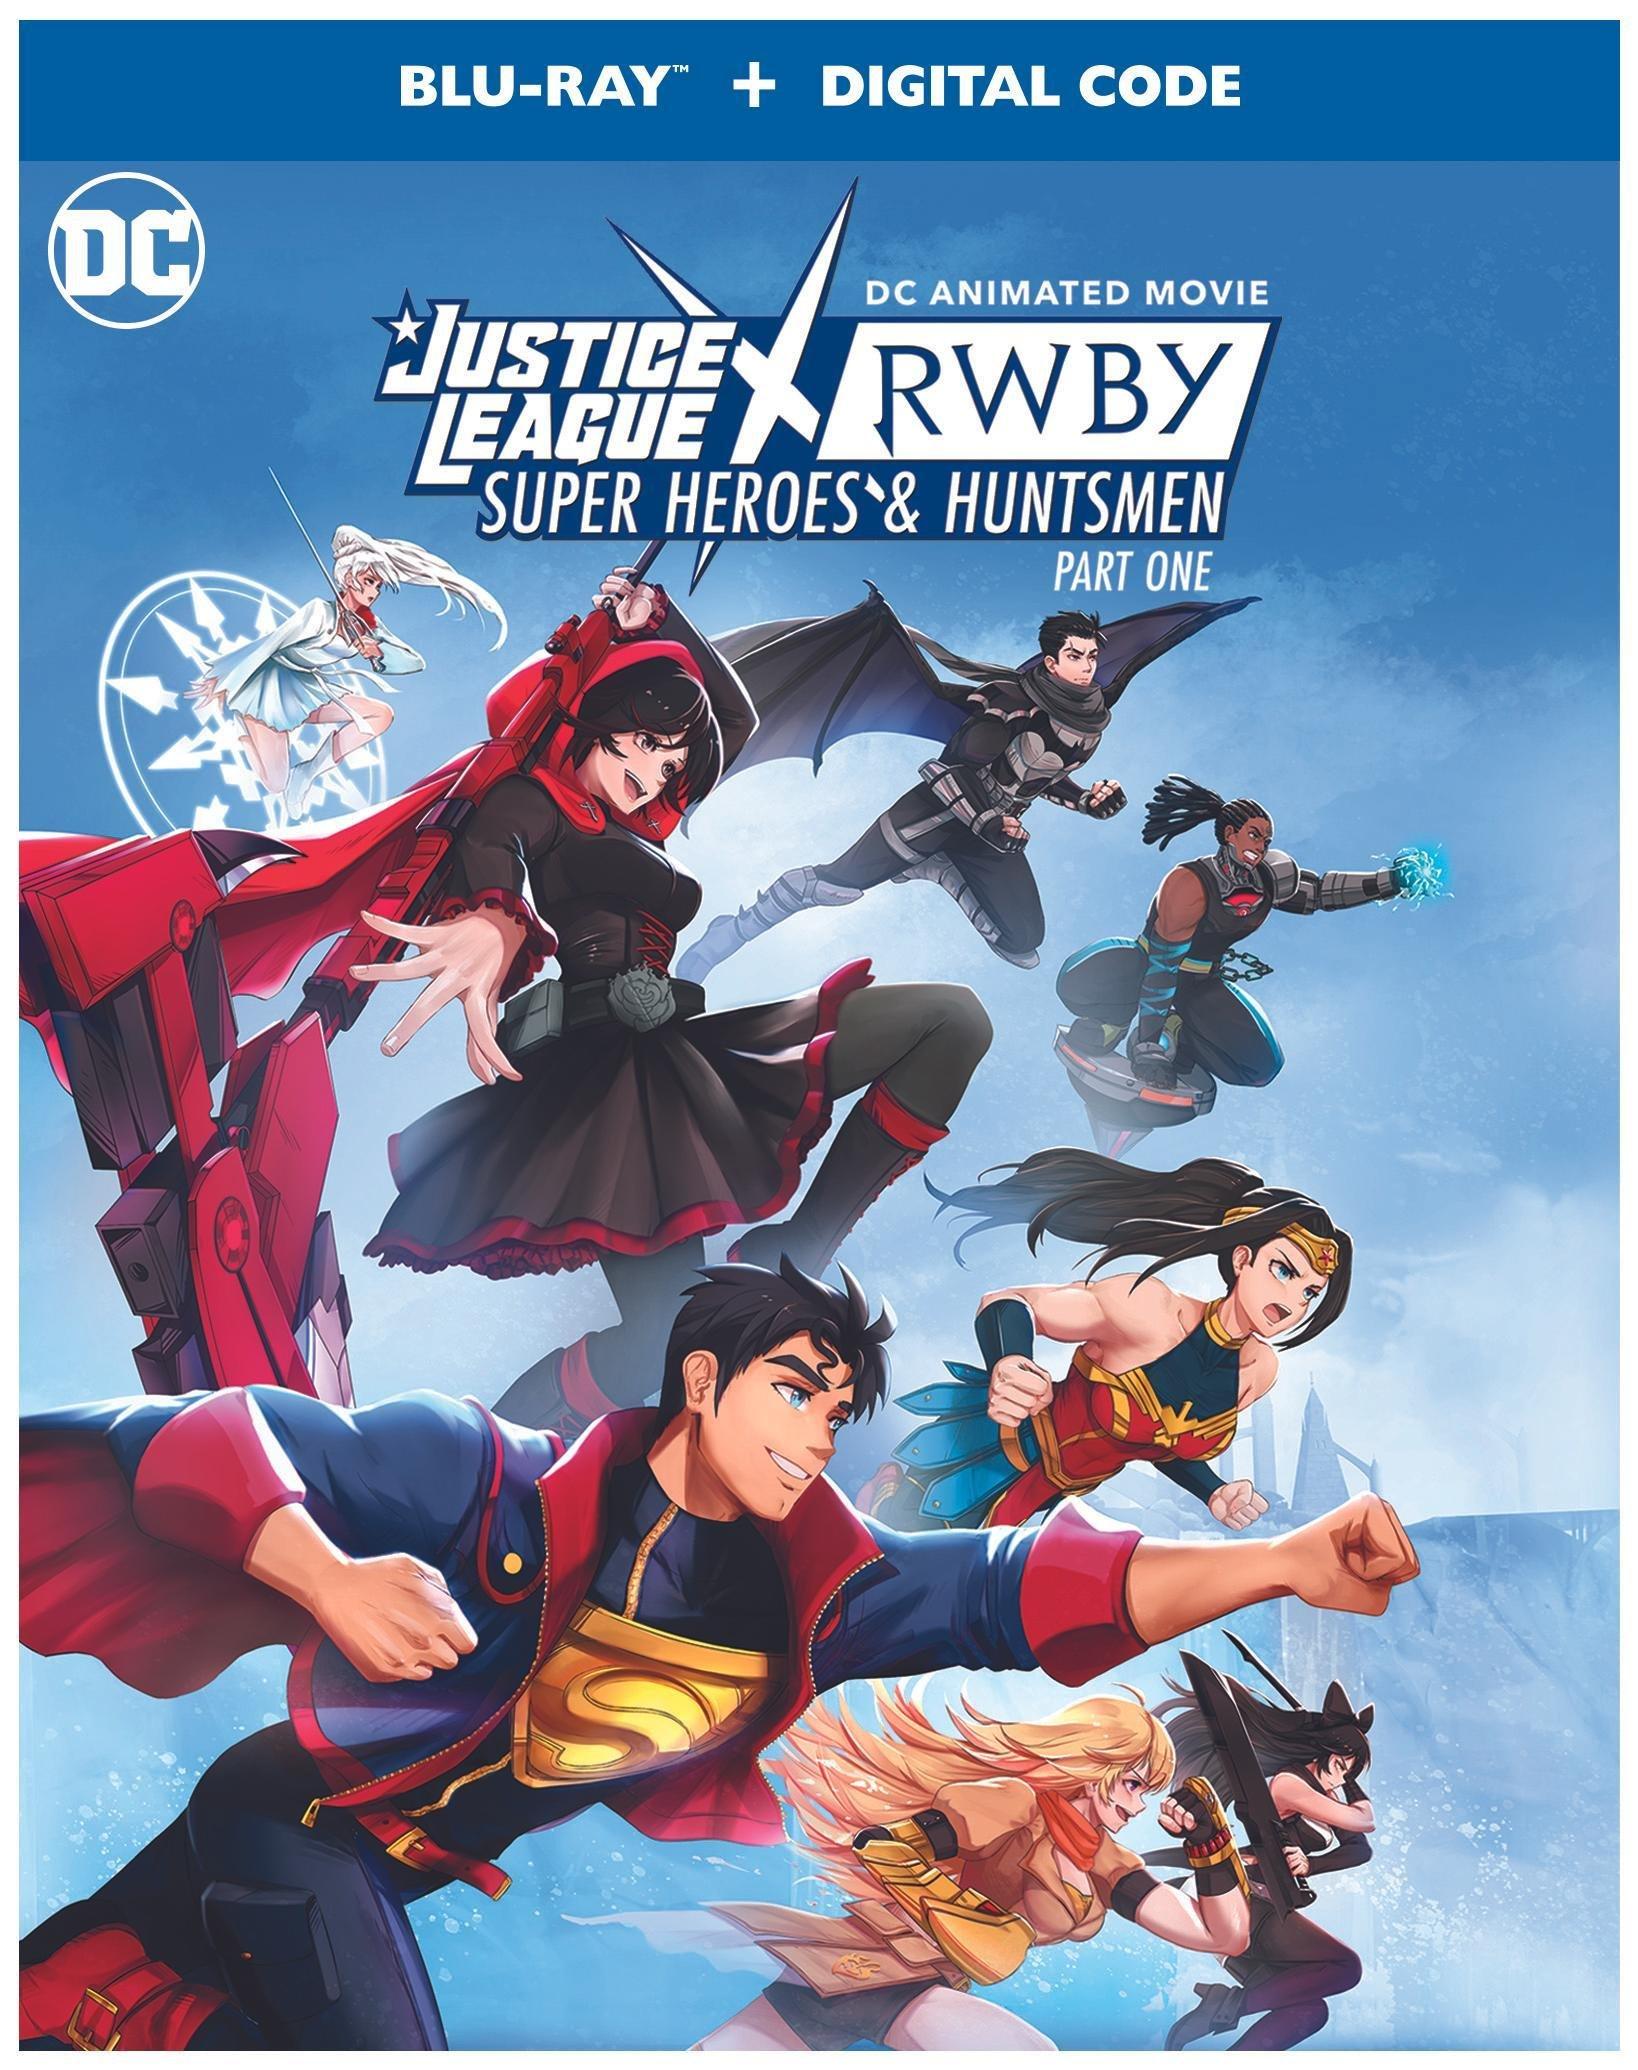 Warner Bros.Home Entertainment Justice League x RWBY: Super Heroes and Huntsmen Part 1 Movie - Blu-Ray and